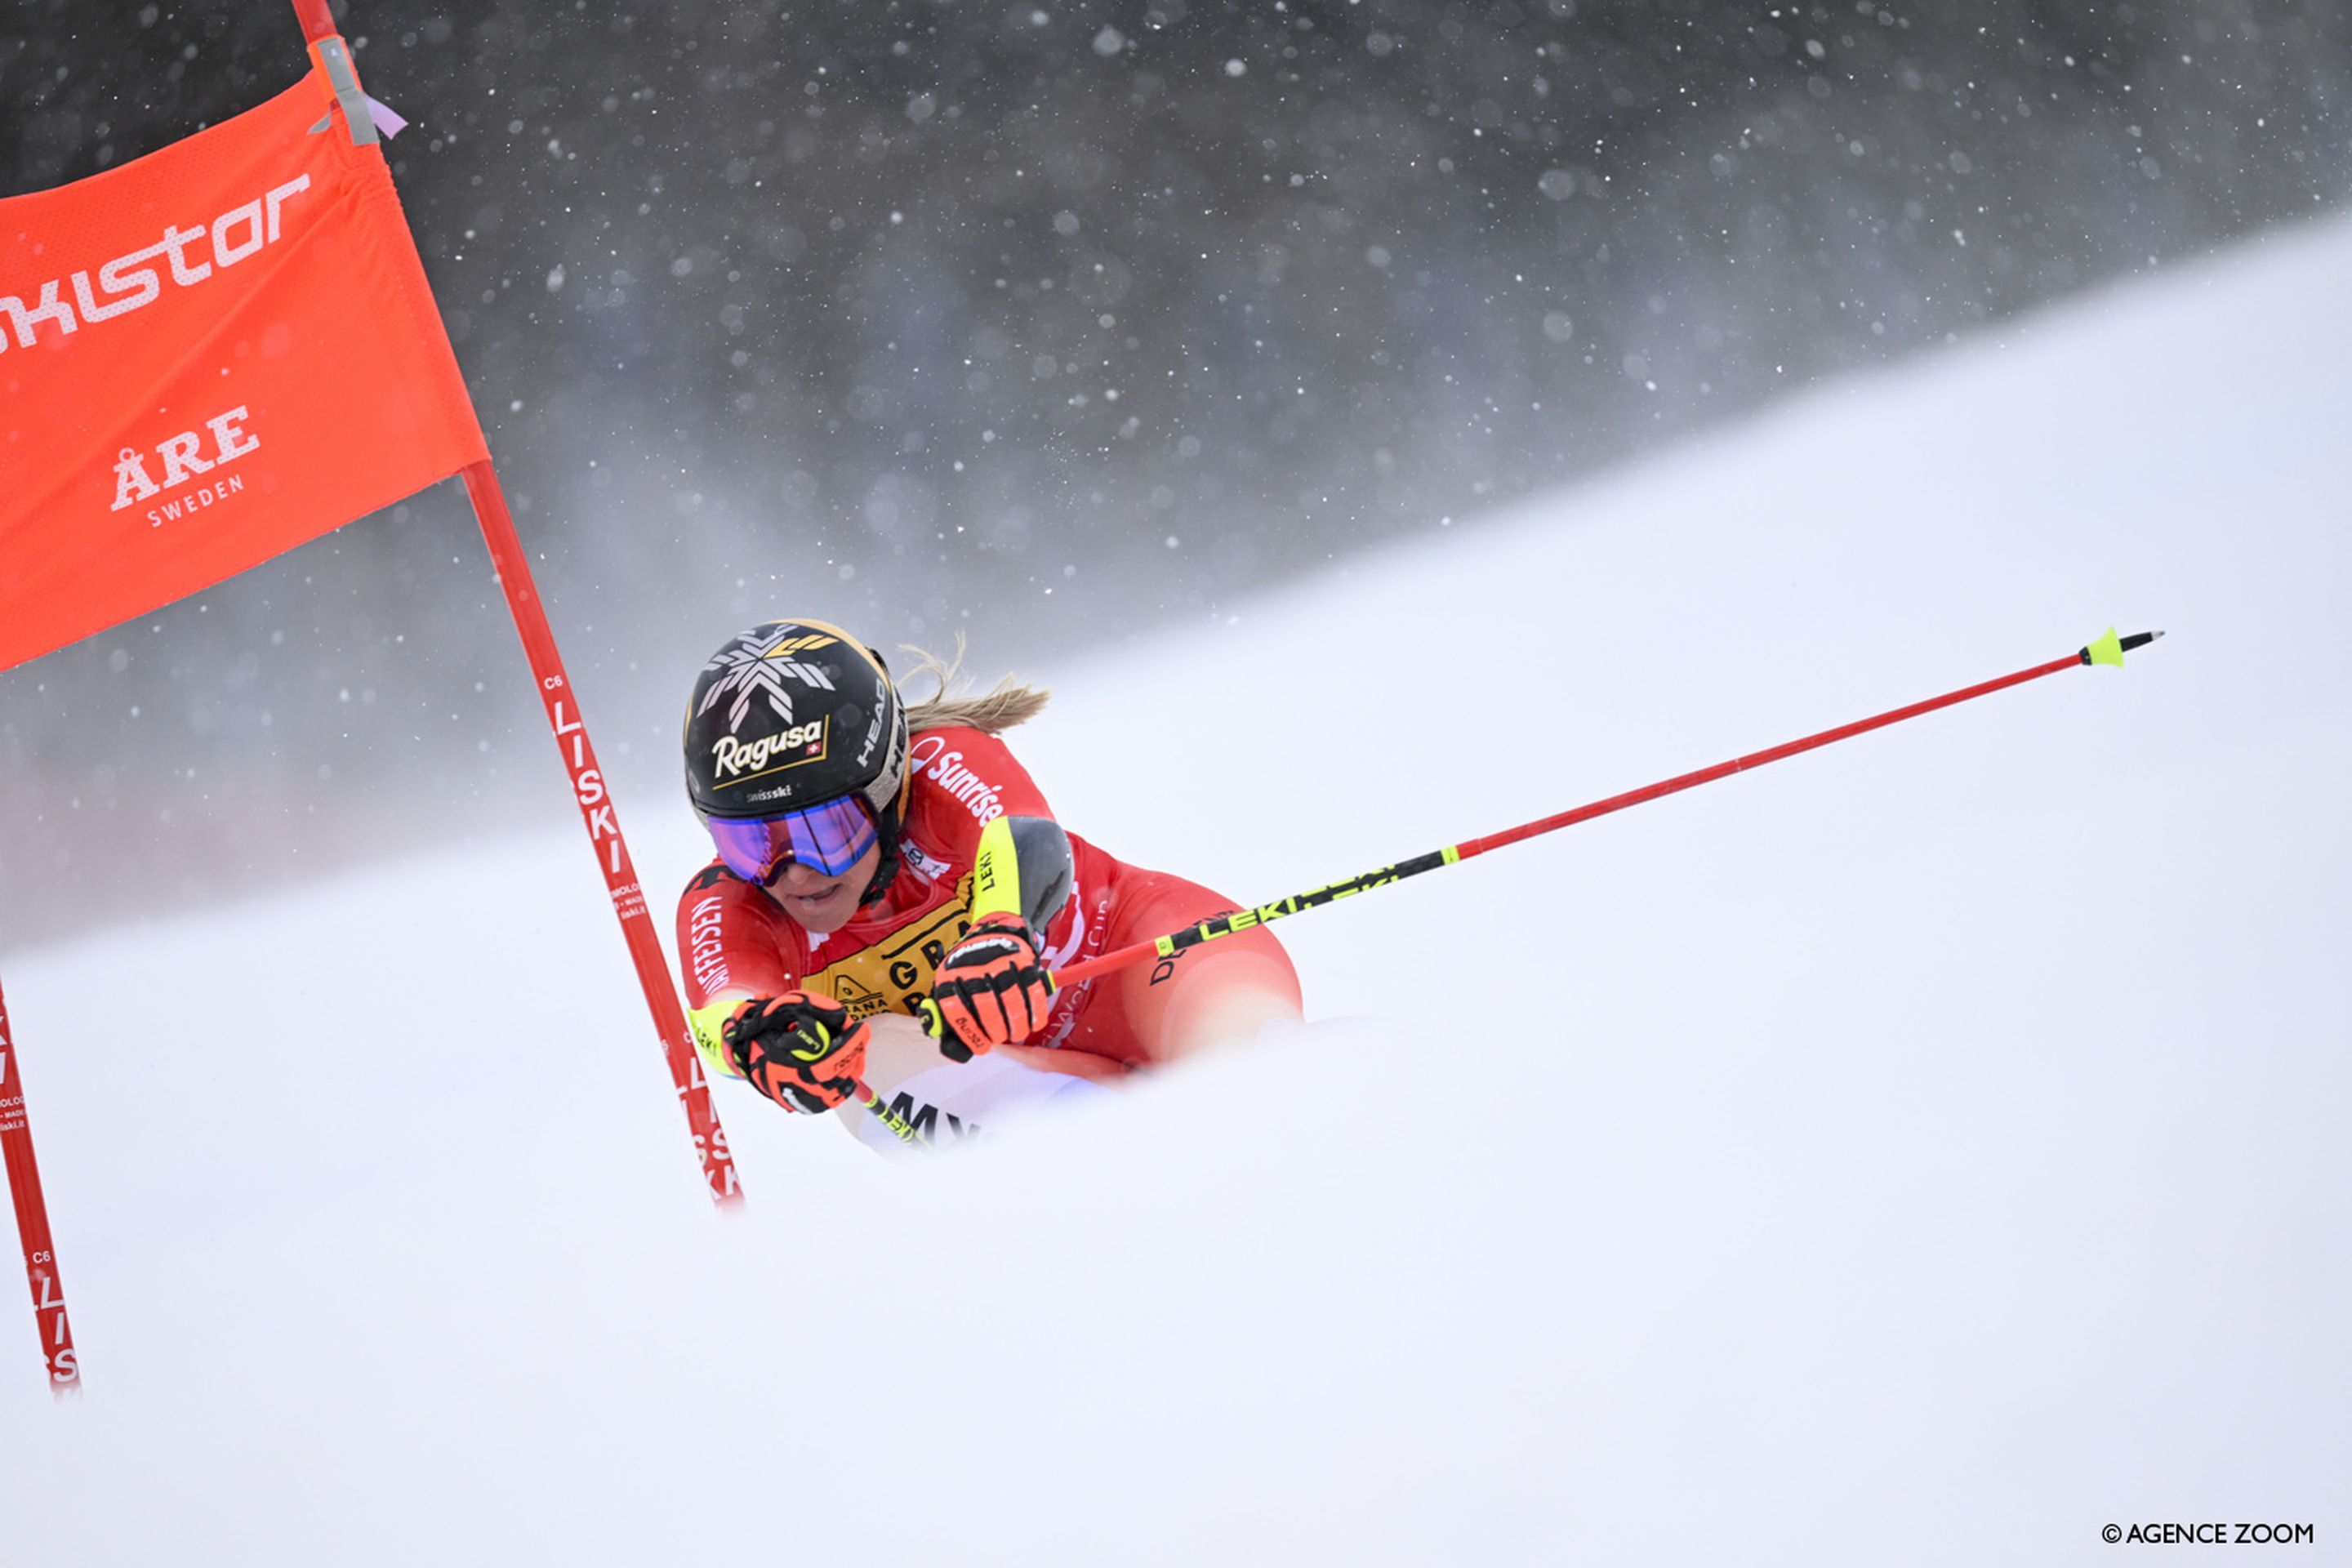 Lara Gut-Behrami (SUI) defies snowfall and flat light to attack a difficult first run in Are (Agence Zoom)